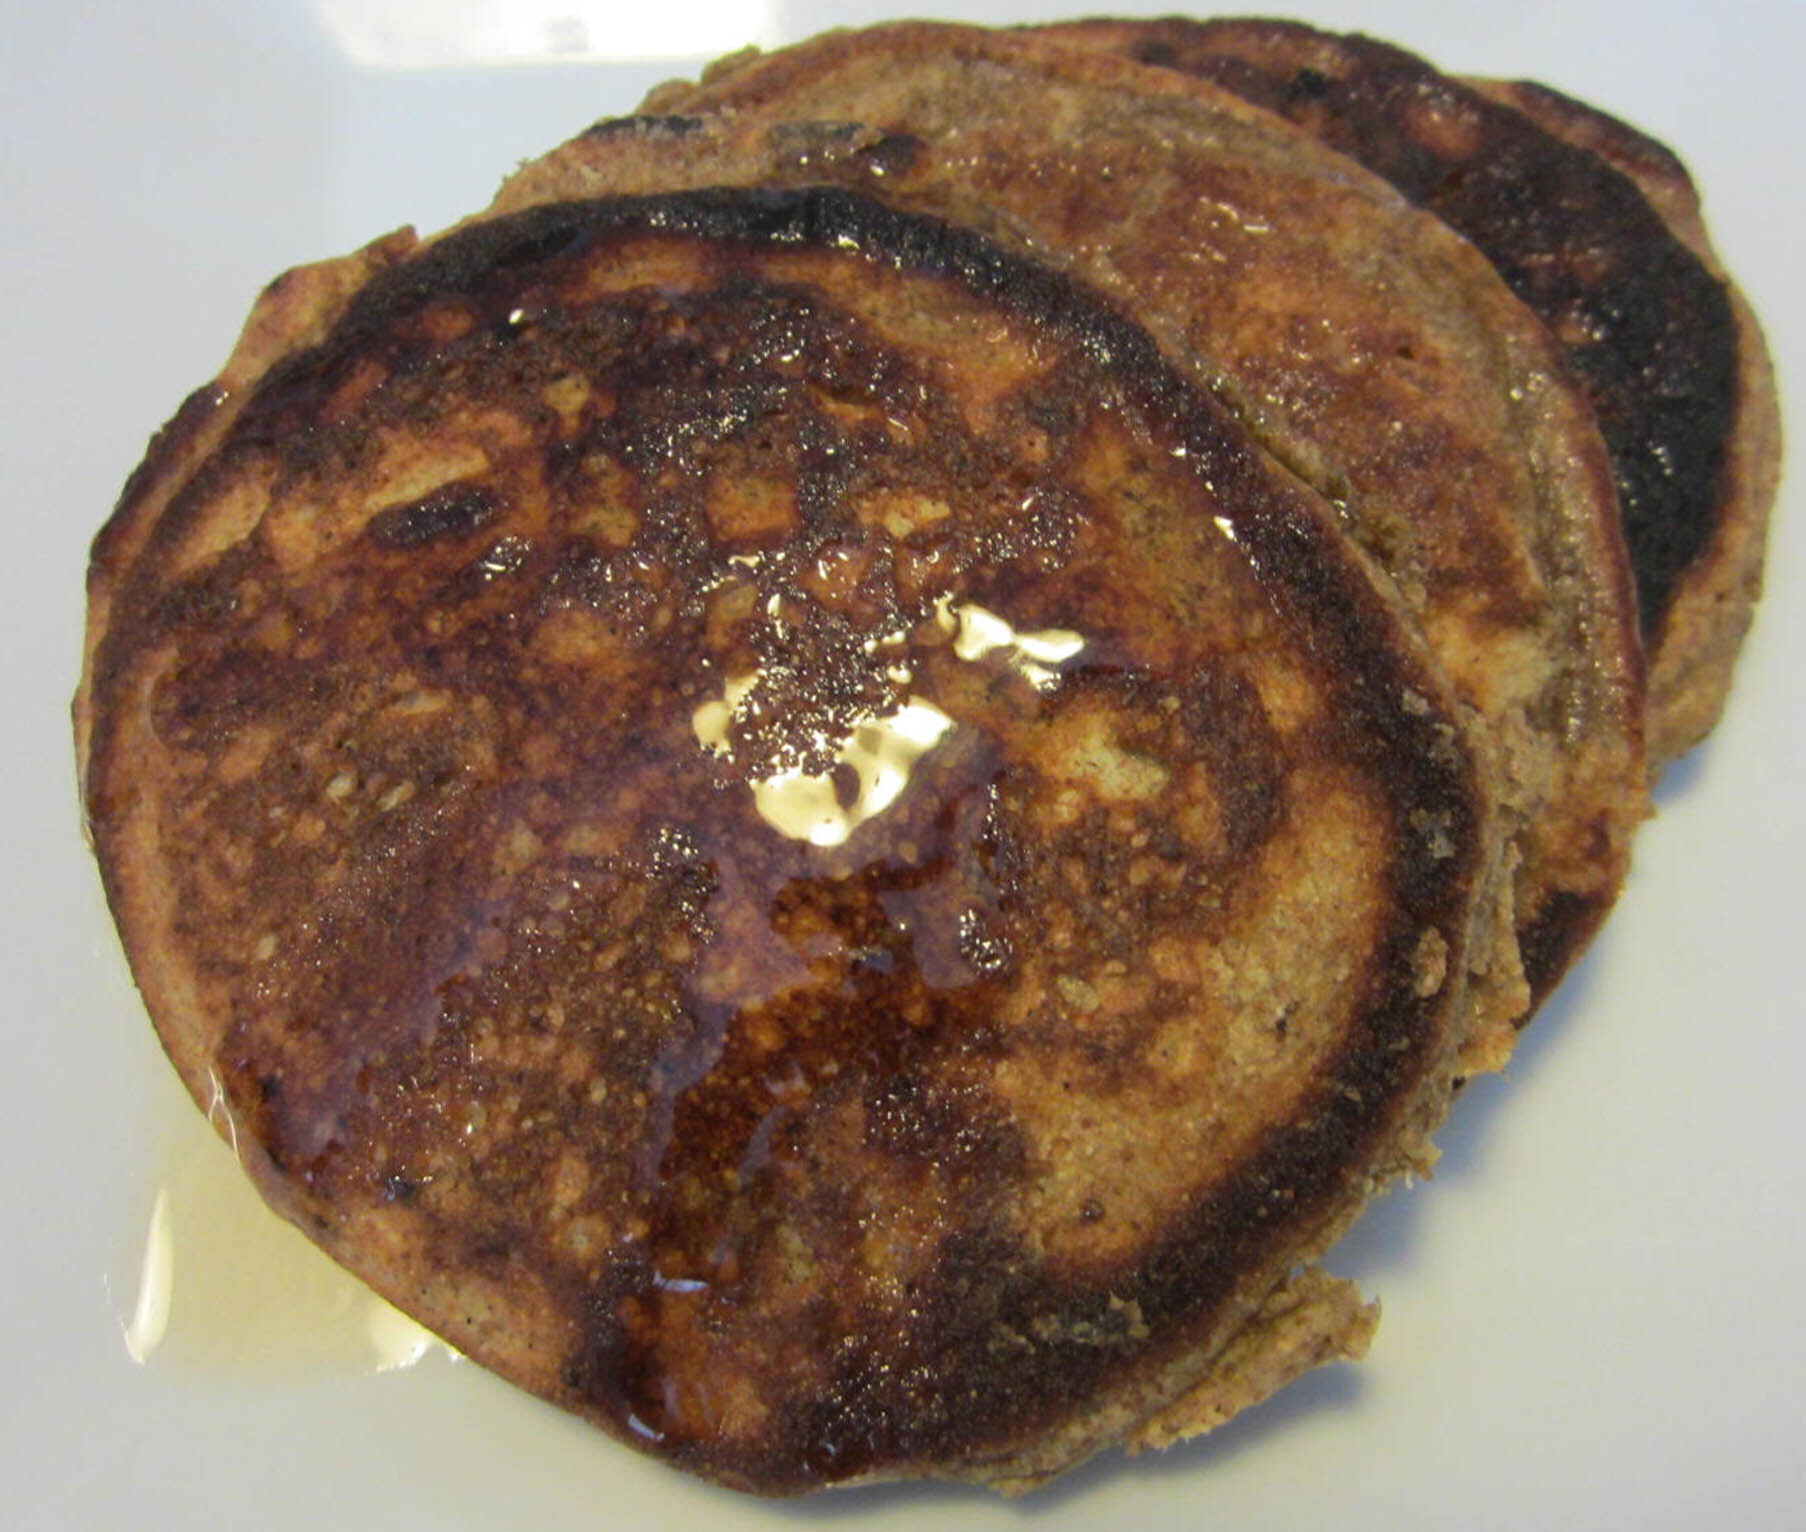 Three peanut coconut pancakes with maple syrup on a white plate